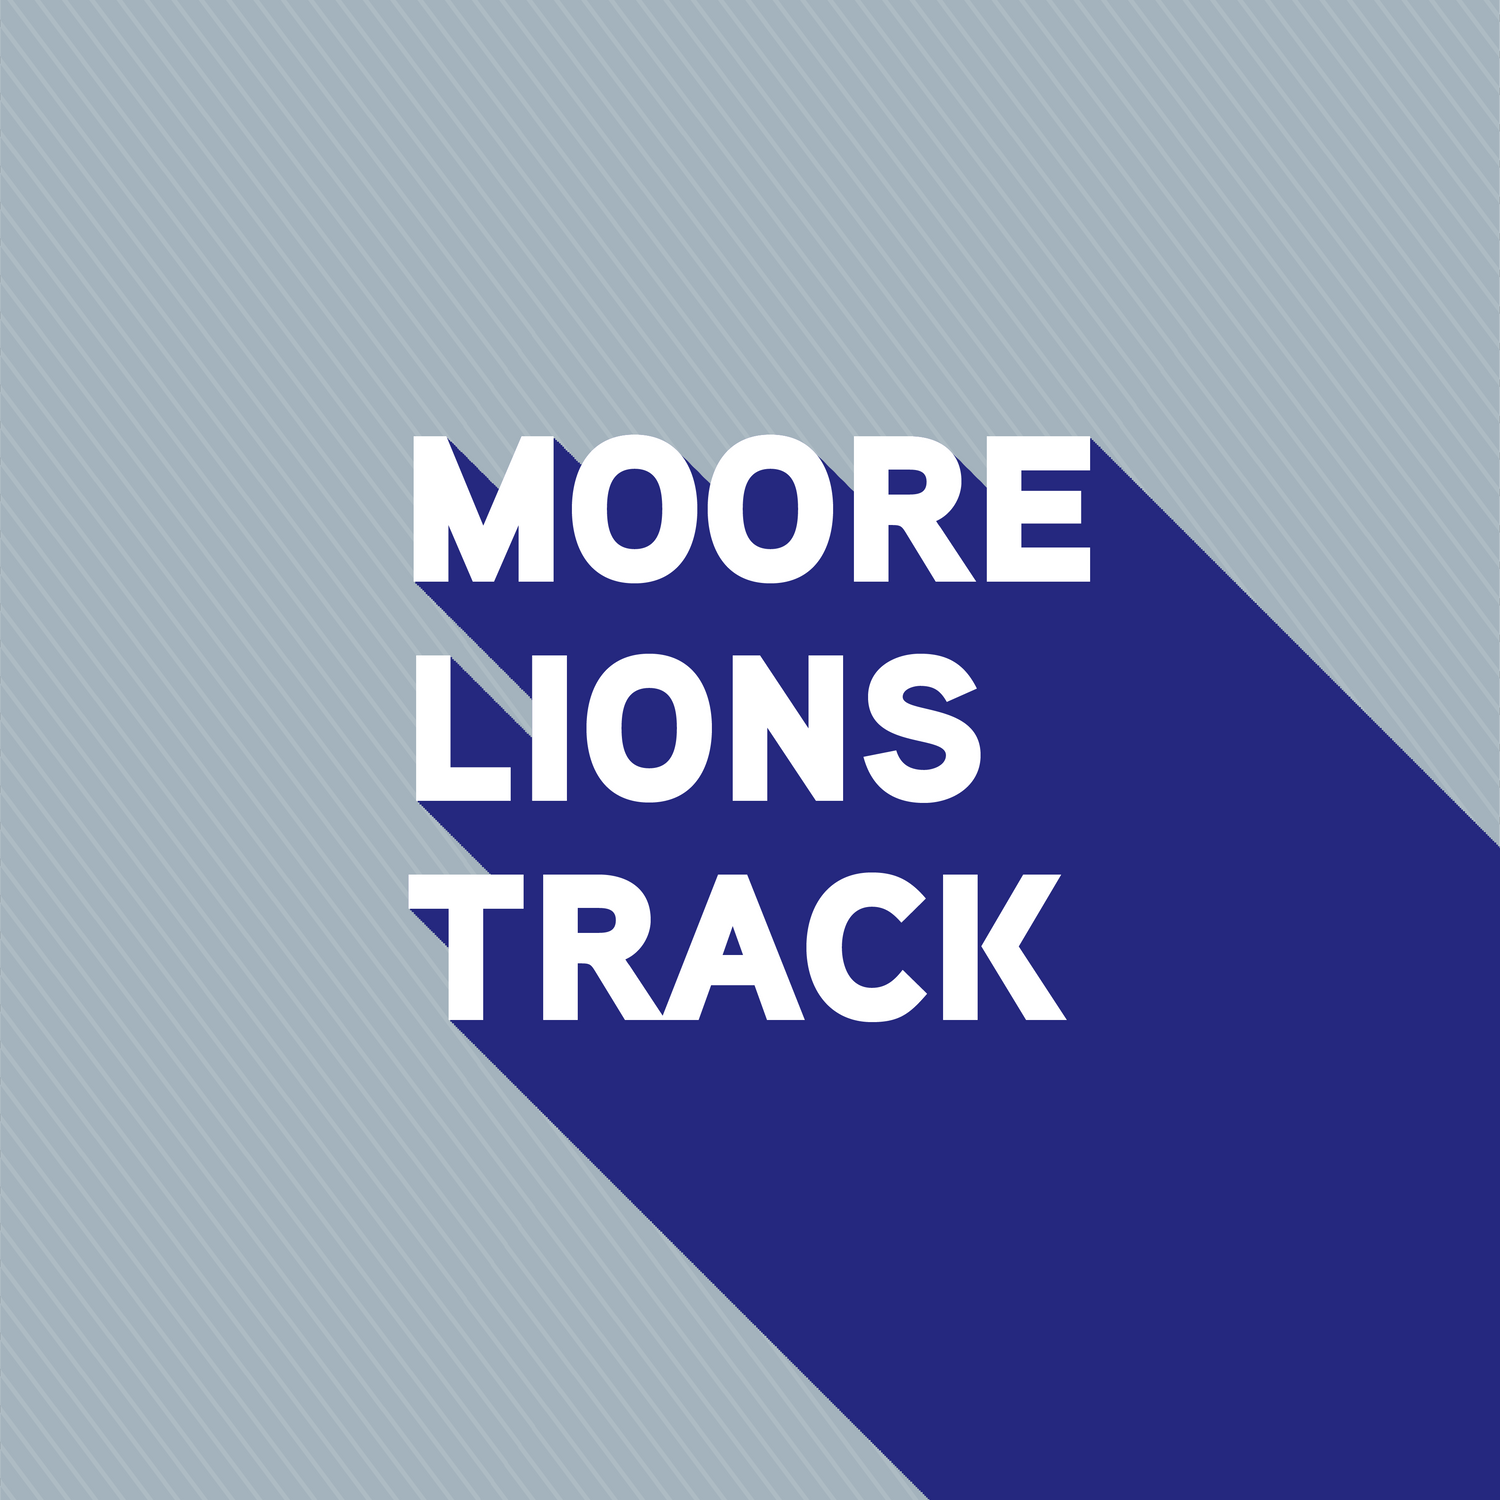 MOORE LIONS TRACK TEAM